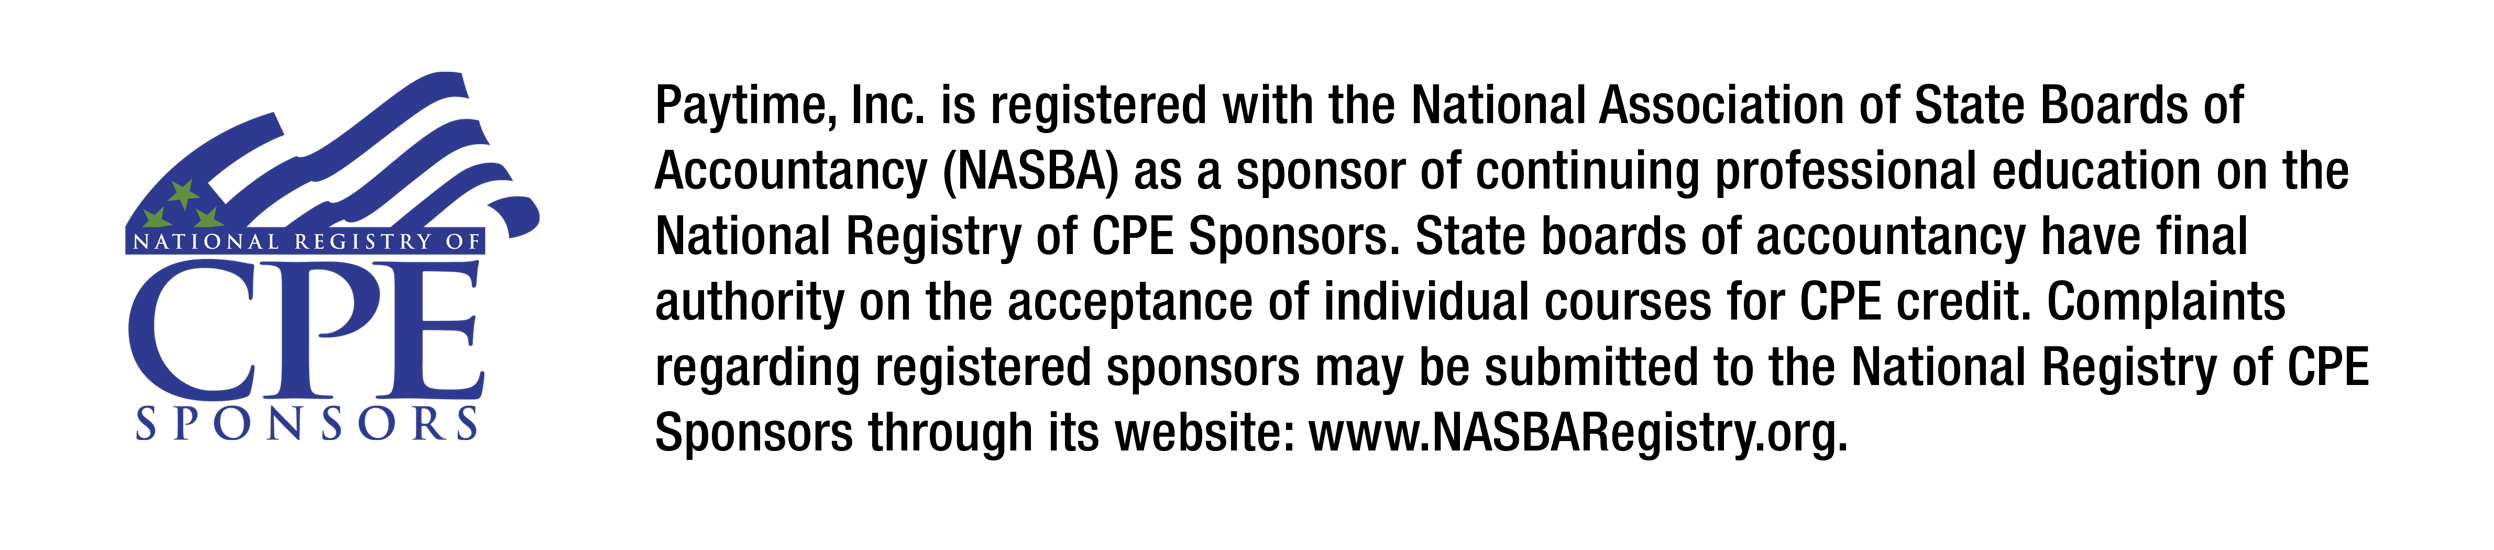 National Association of State Boards of Accountancy (NASBA)